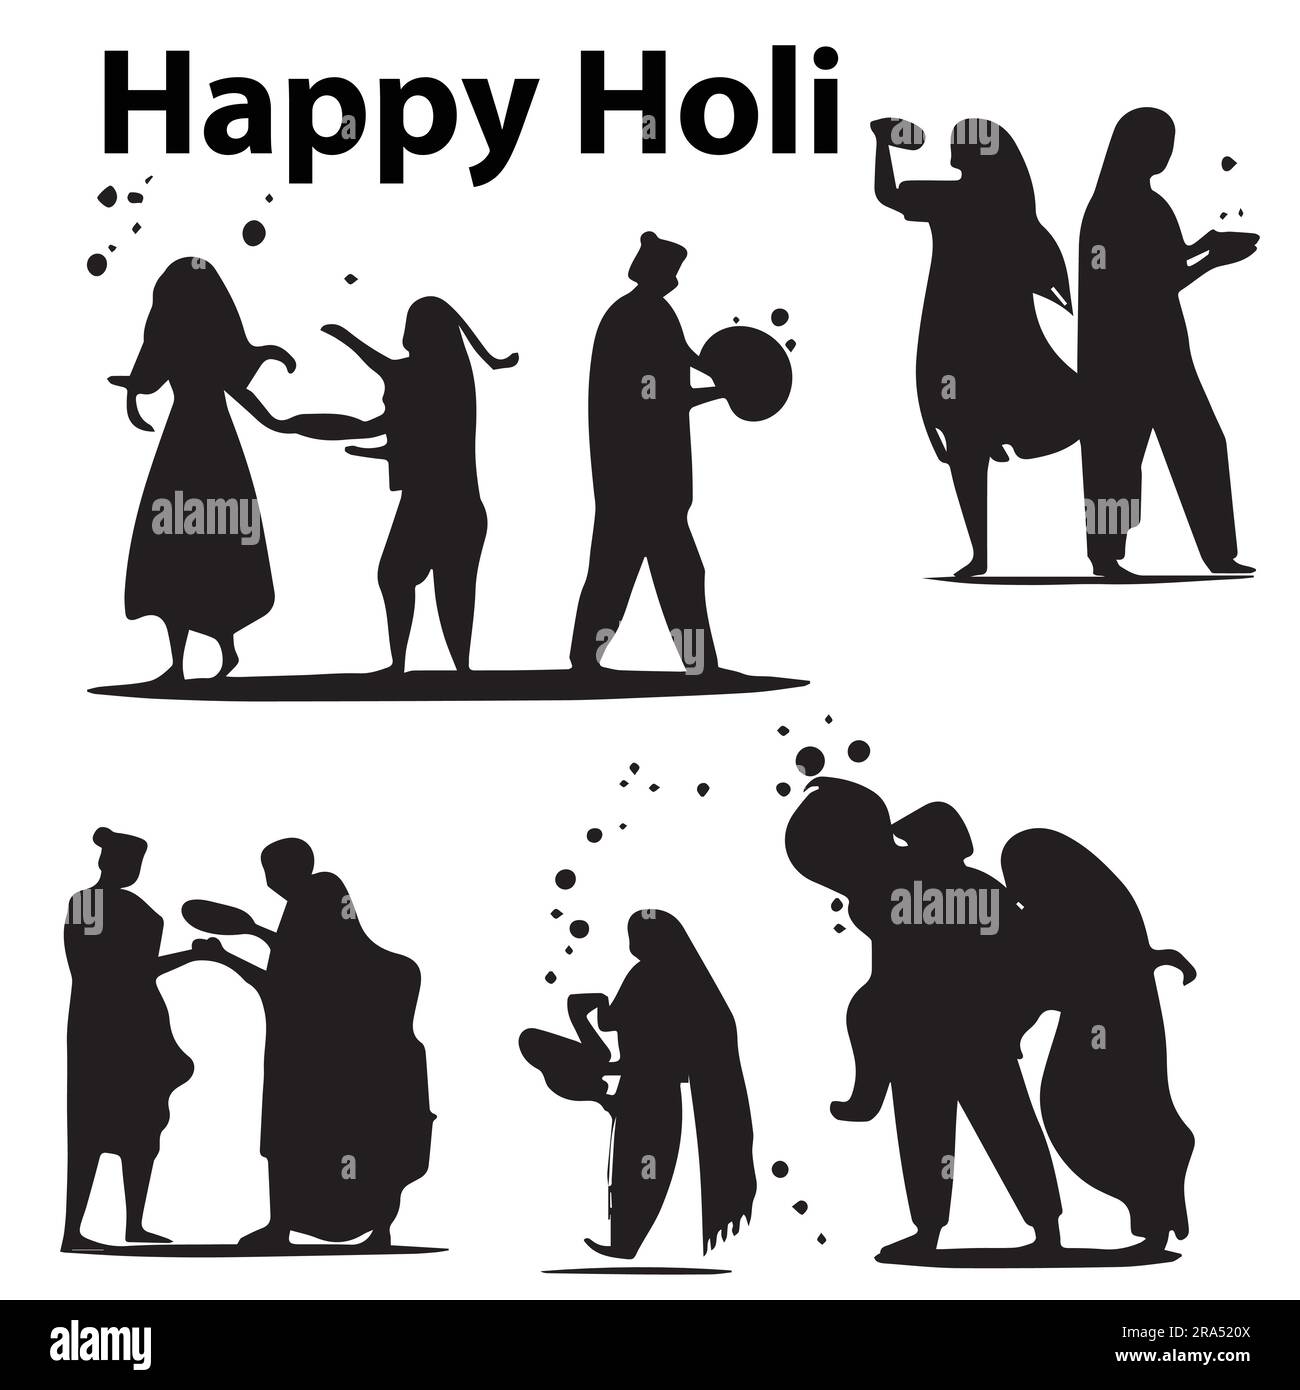 A set of Silhouette Holi people vector illustration Stock Vector